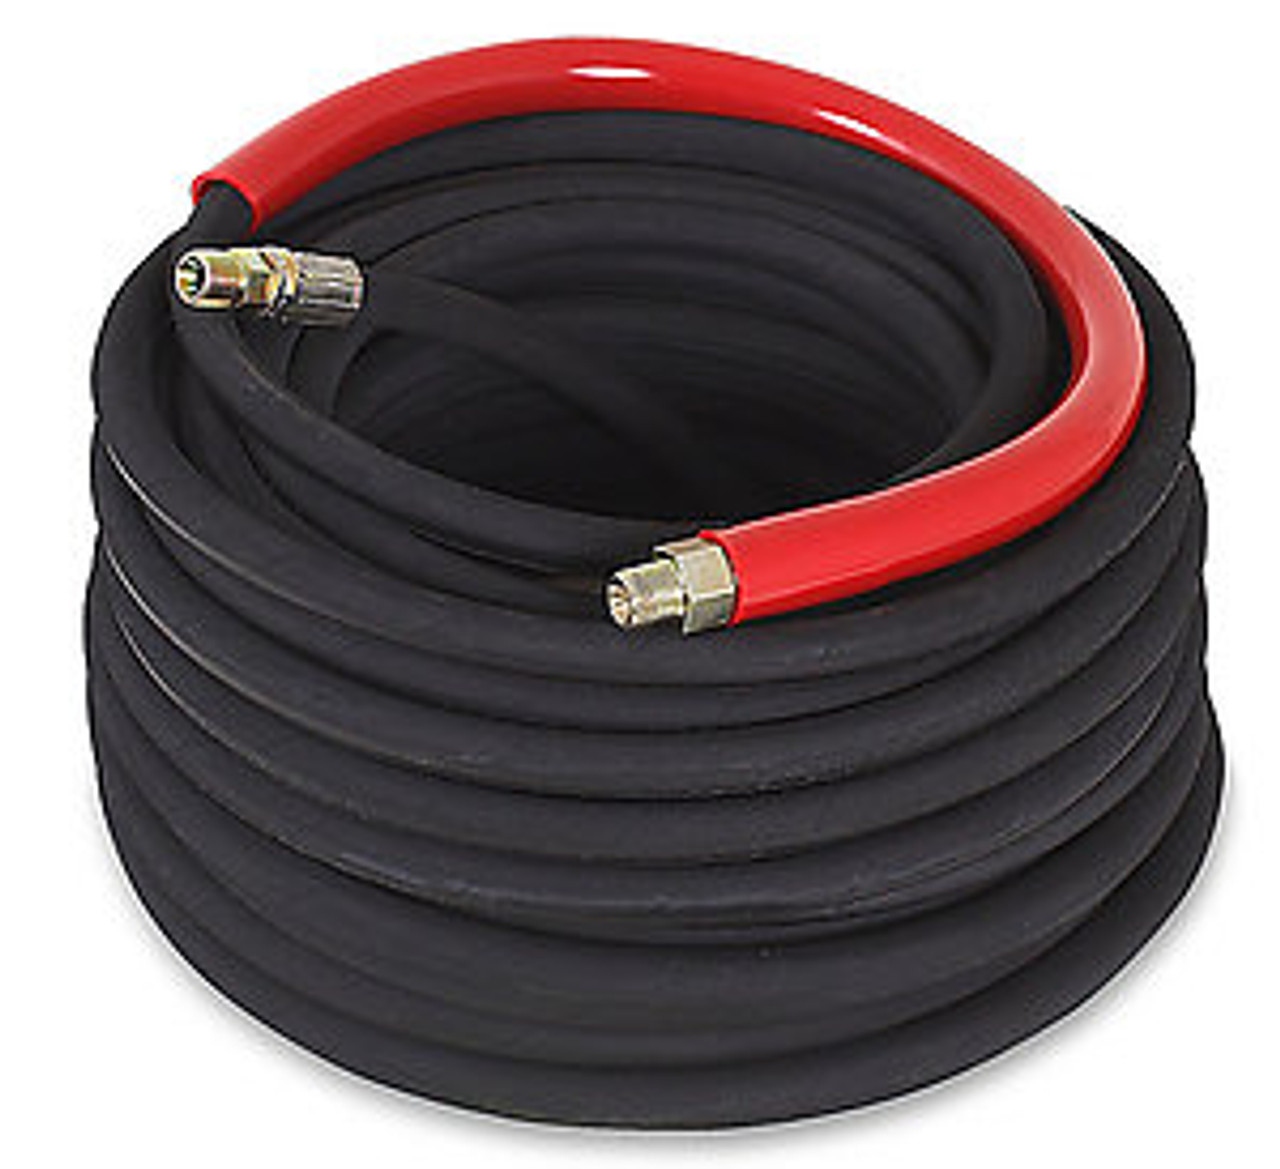 Mi-T-M 15-0161 Extension Hoses and Hose Reels, High Pressure Hose - Hot Water